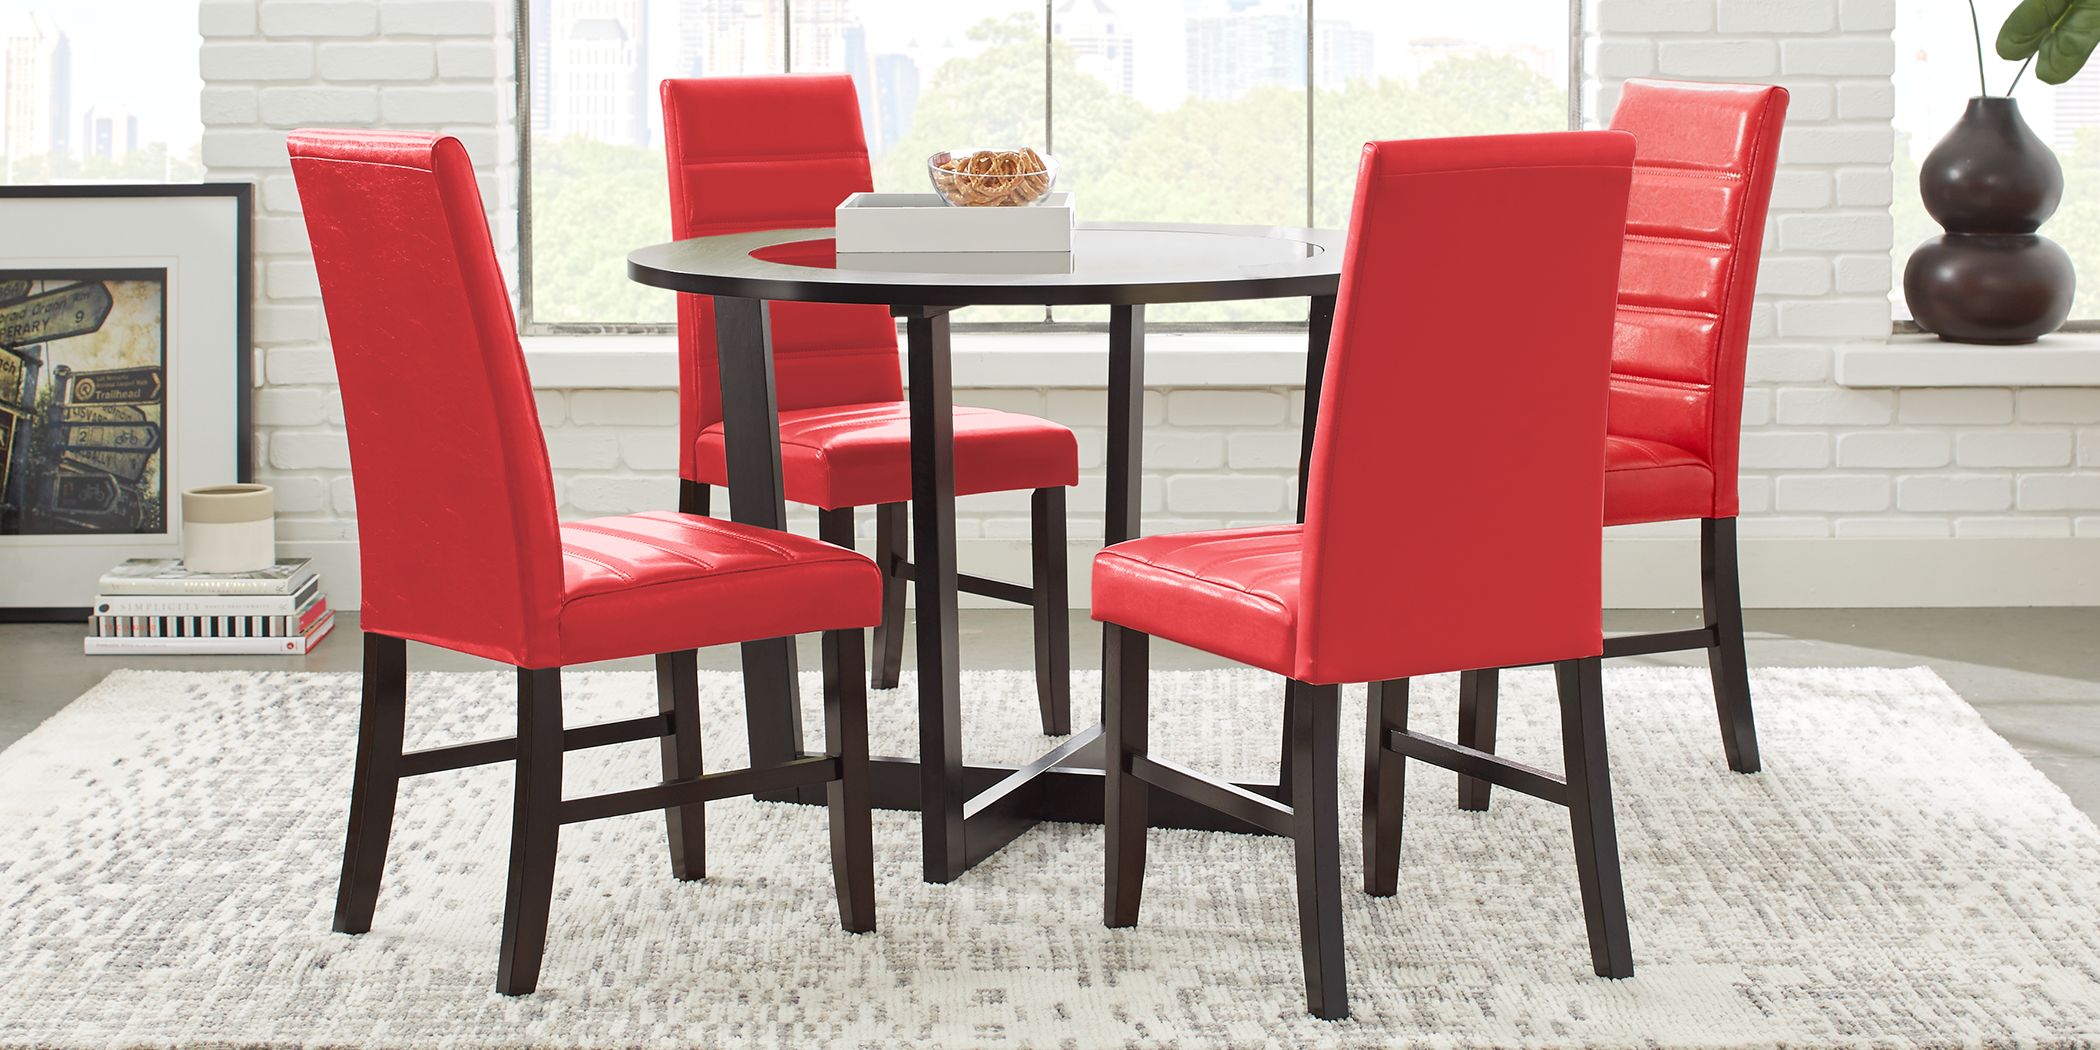 Red Dining Room Table Sets For, Glass Dining Table Red Chairs